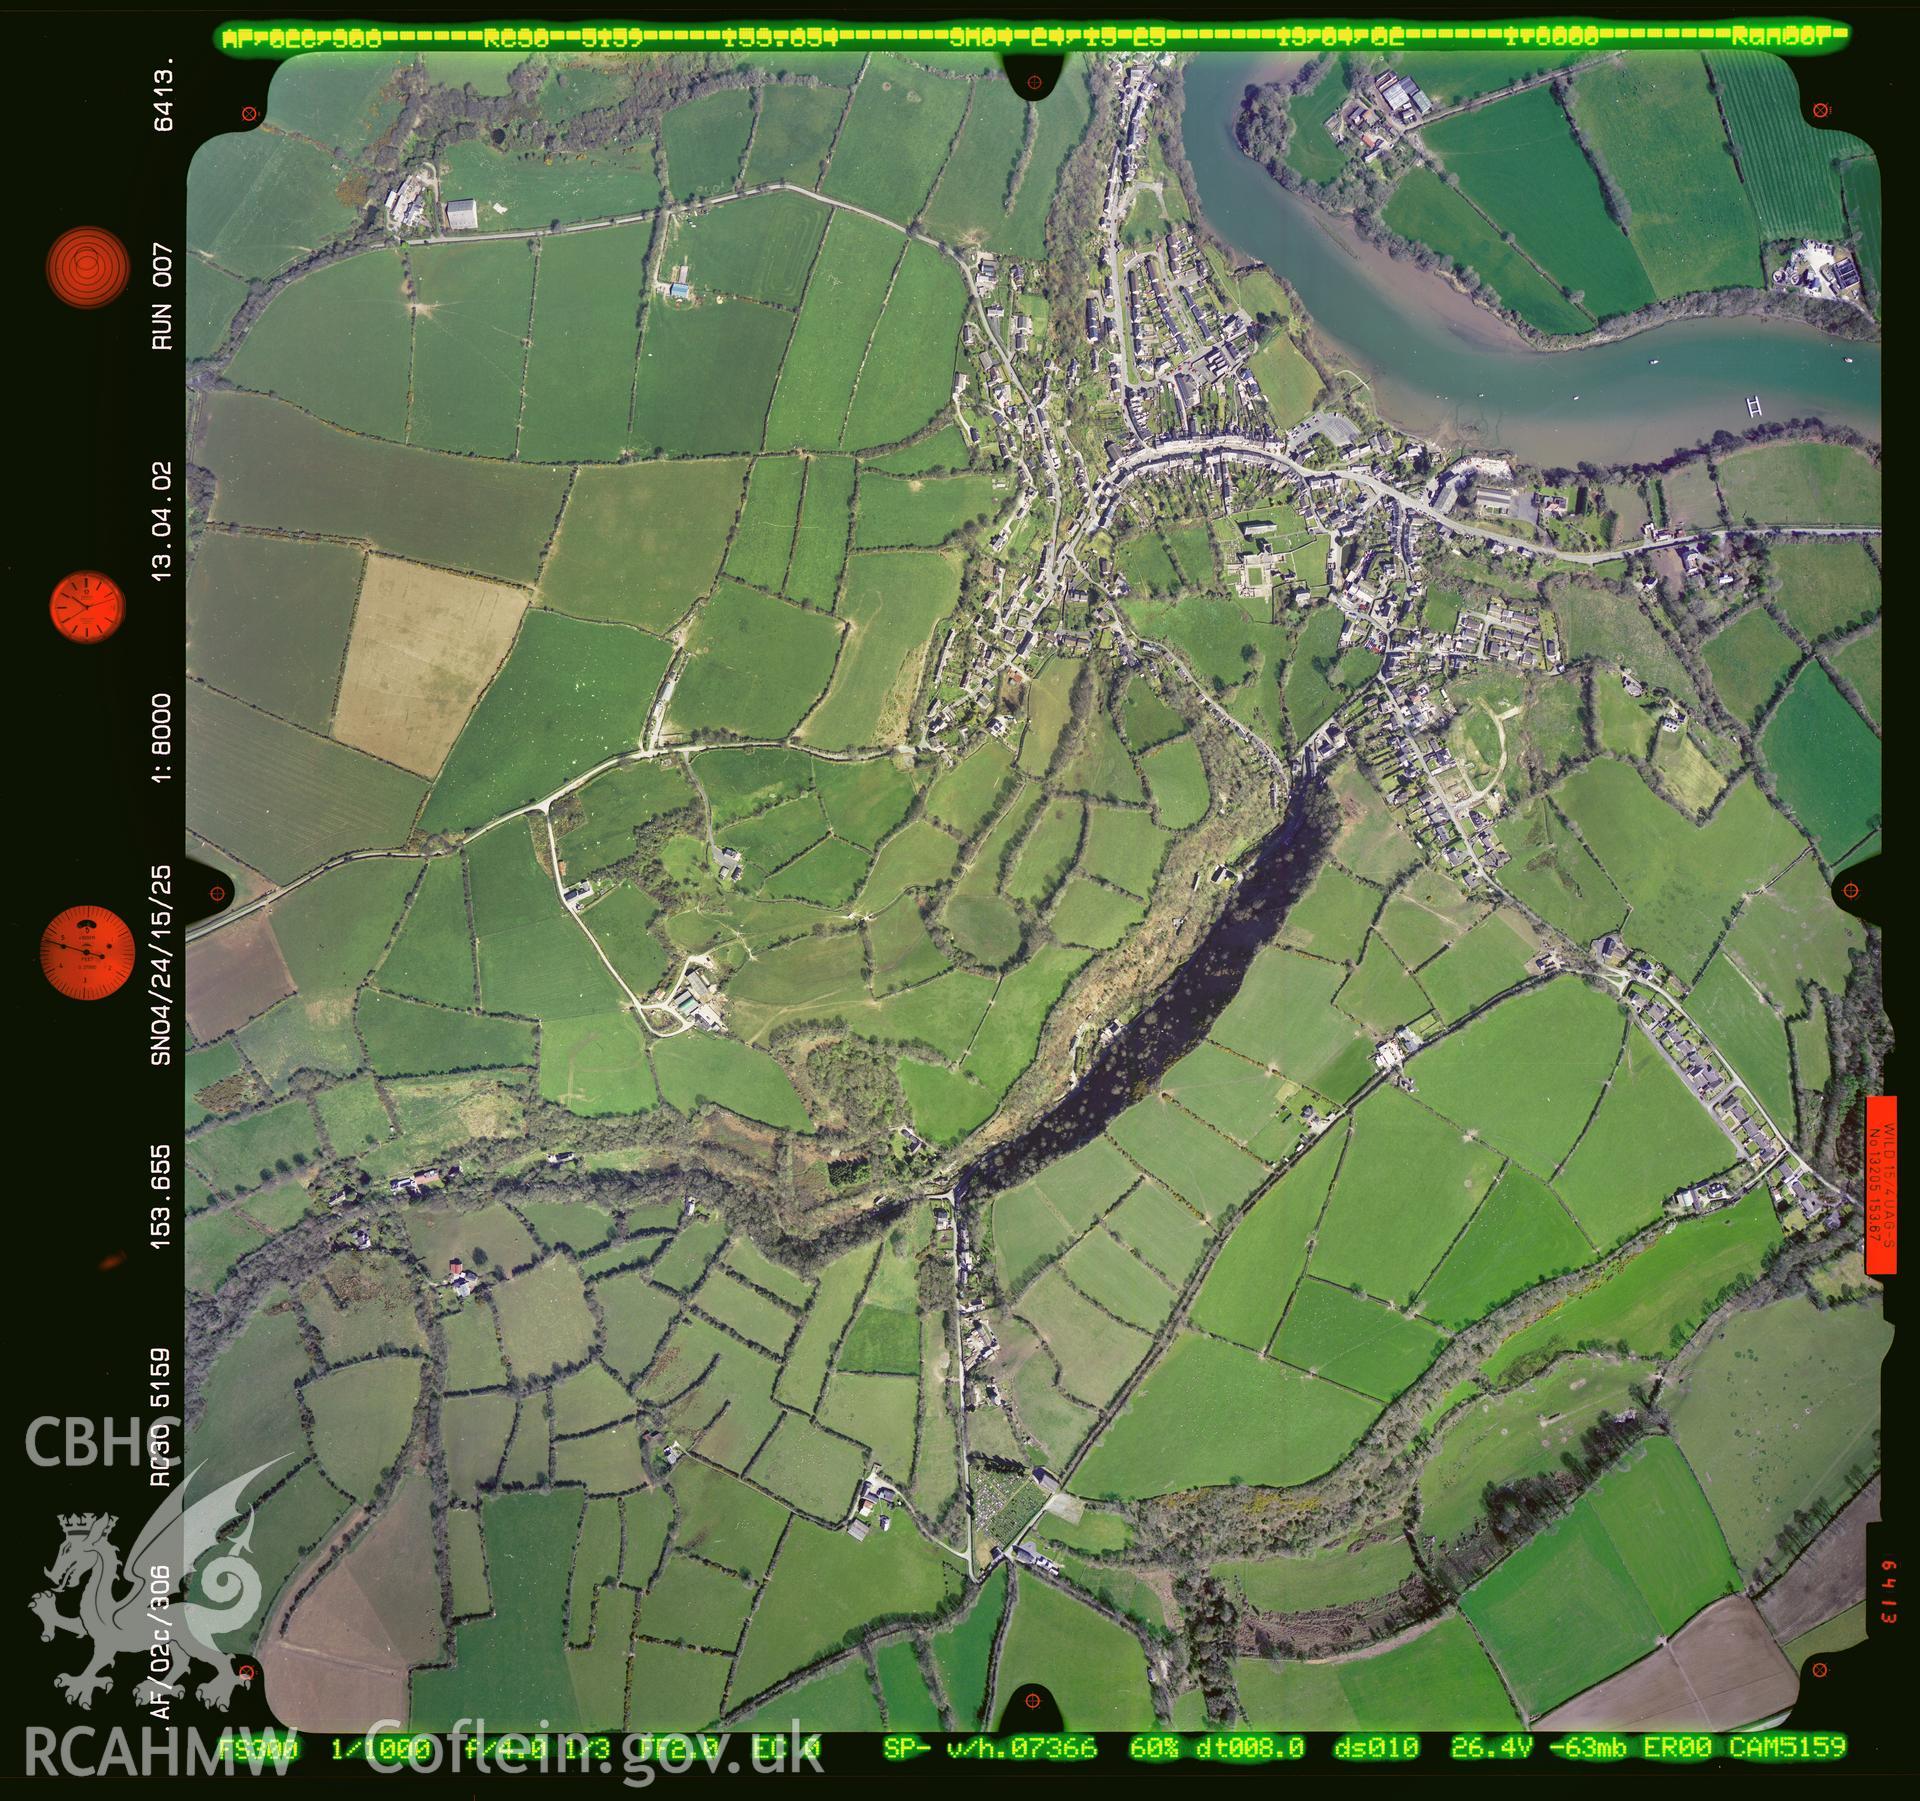 Digital copy of an Ordnance Survey aerial view of St. Dogmaels dated 2002.